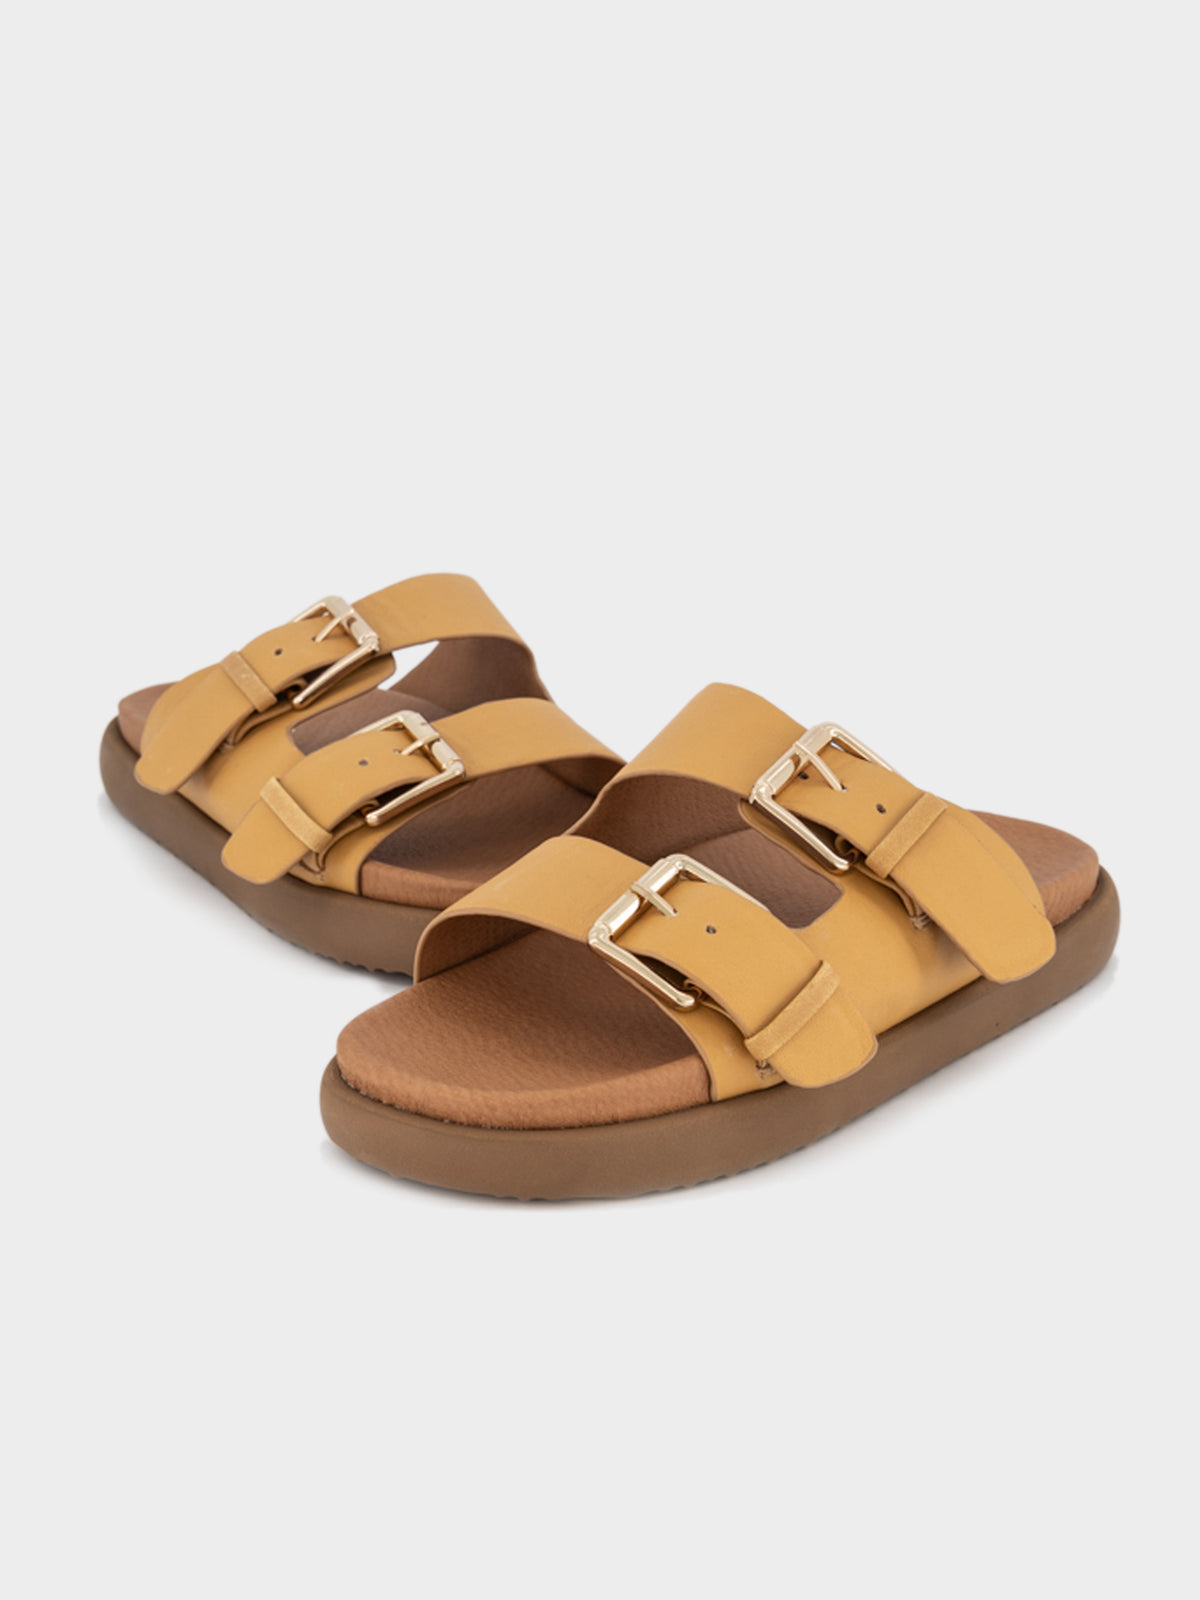 Womens Ultralite Buckle Sandal in Natural Leather